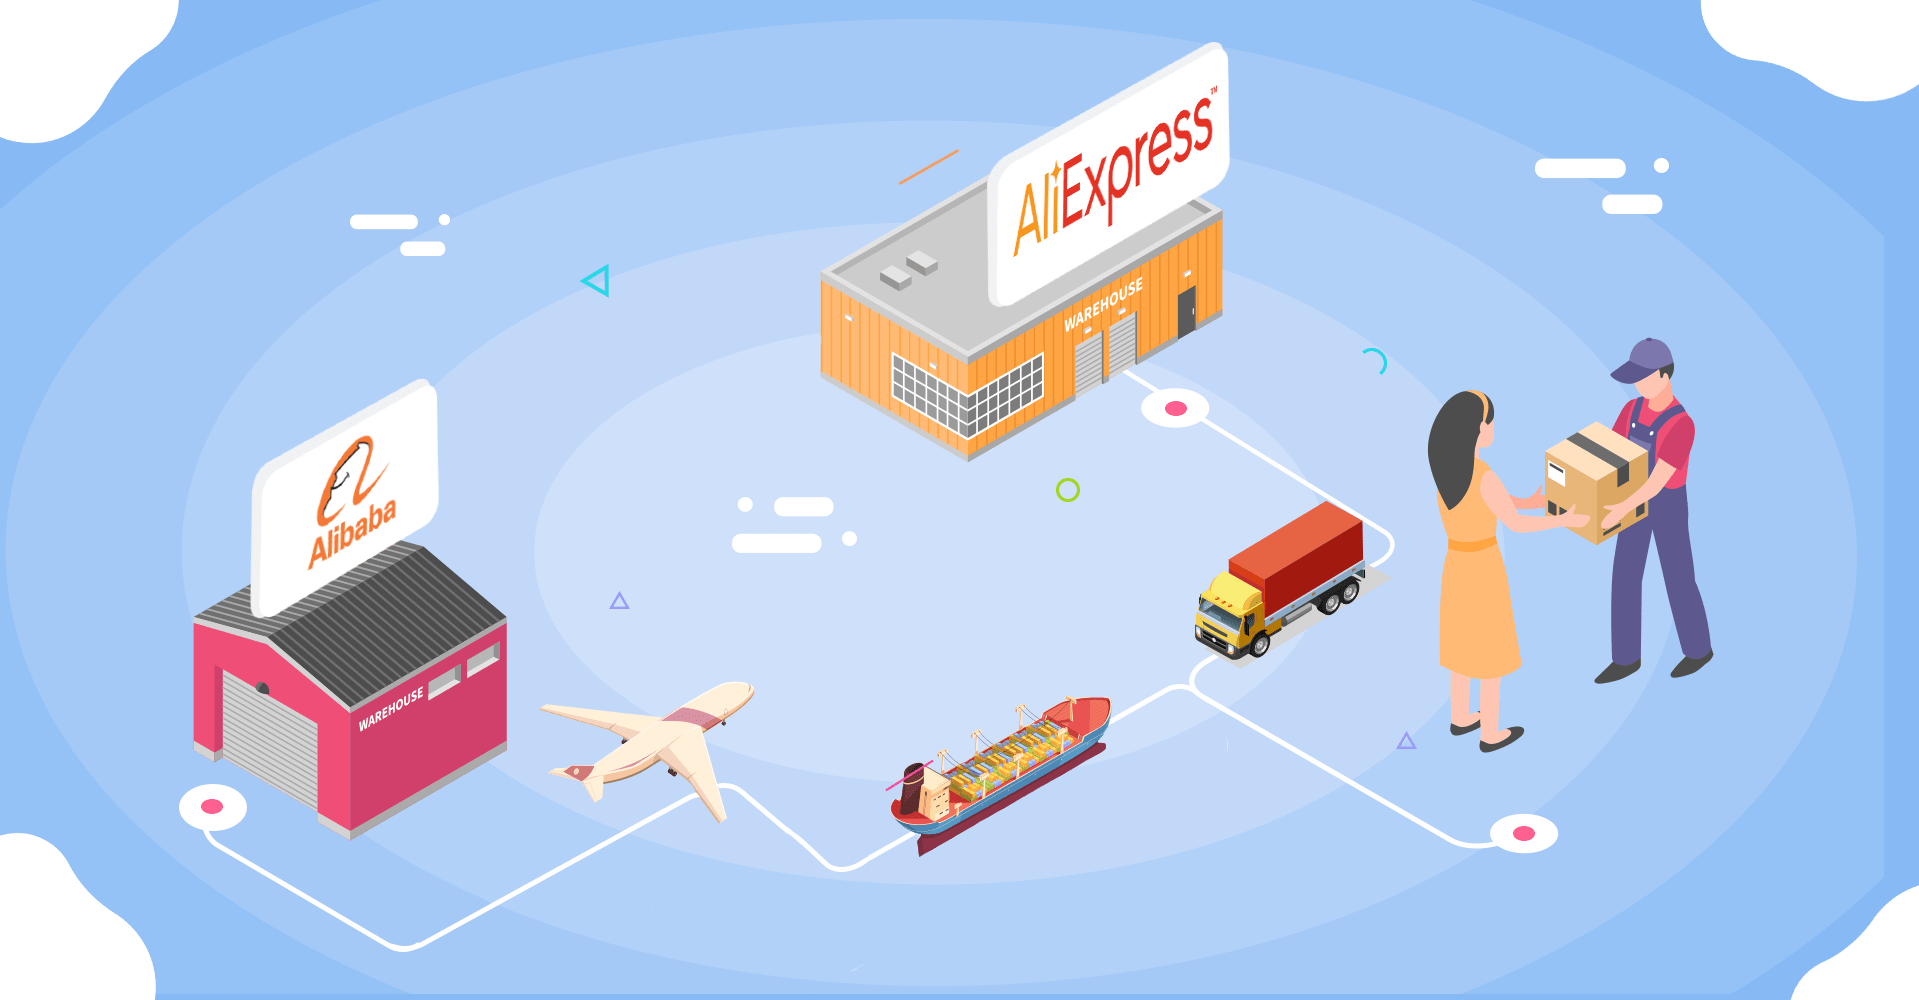 How to find suppliers on Alibaba and AliExpress 